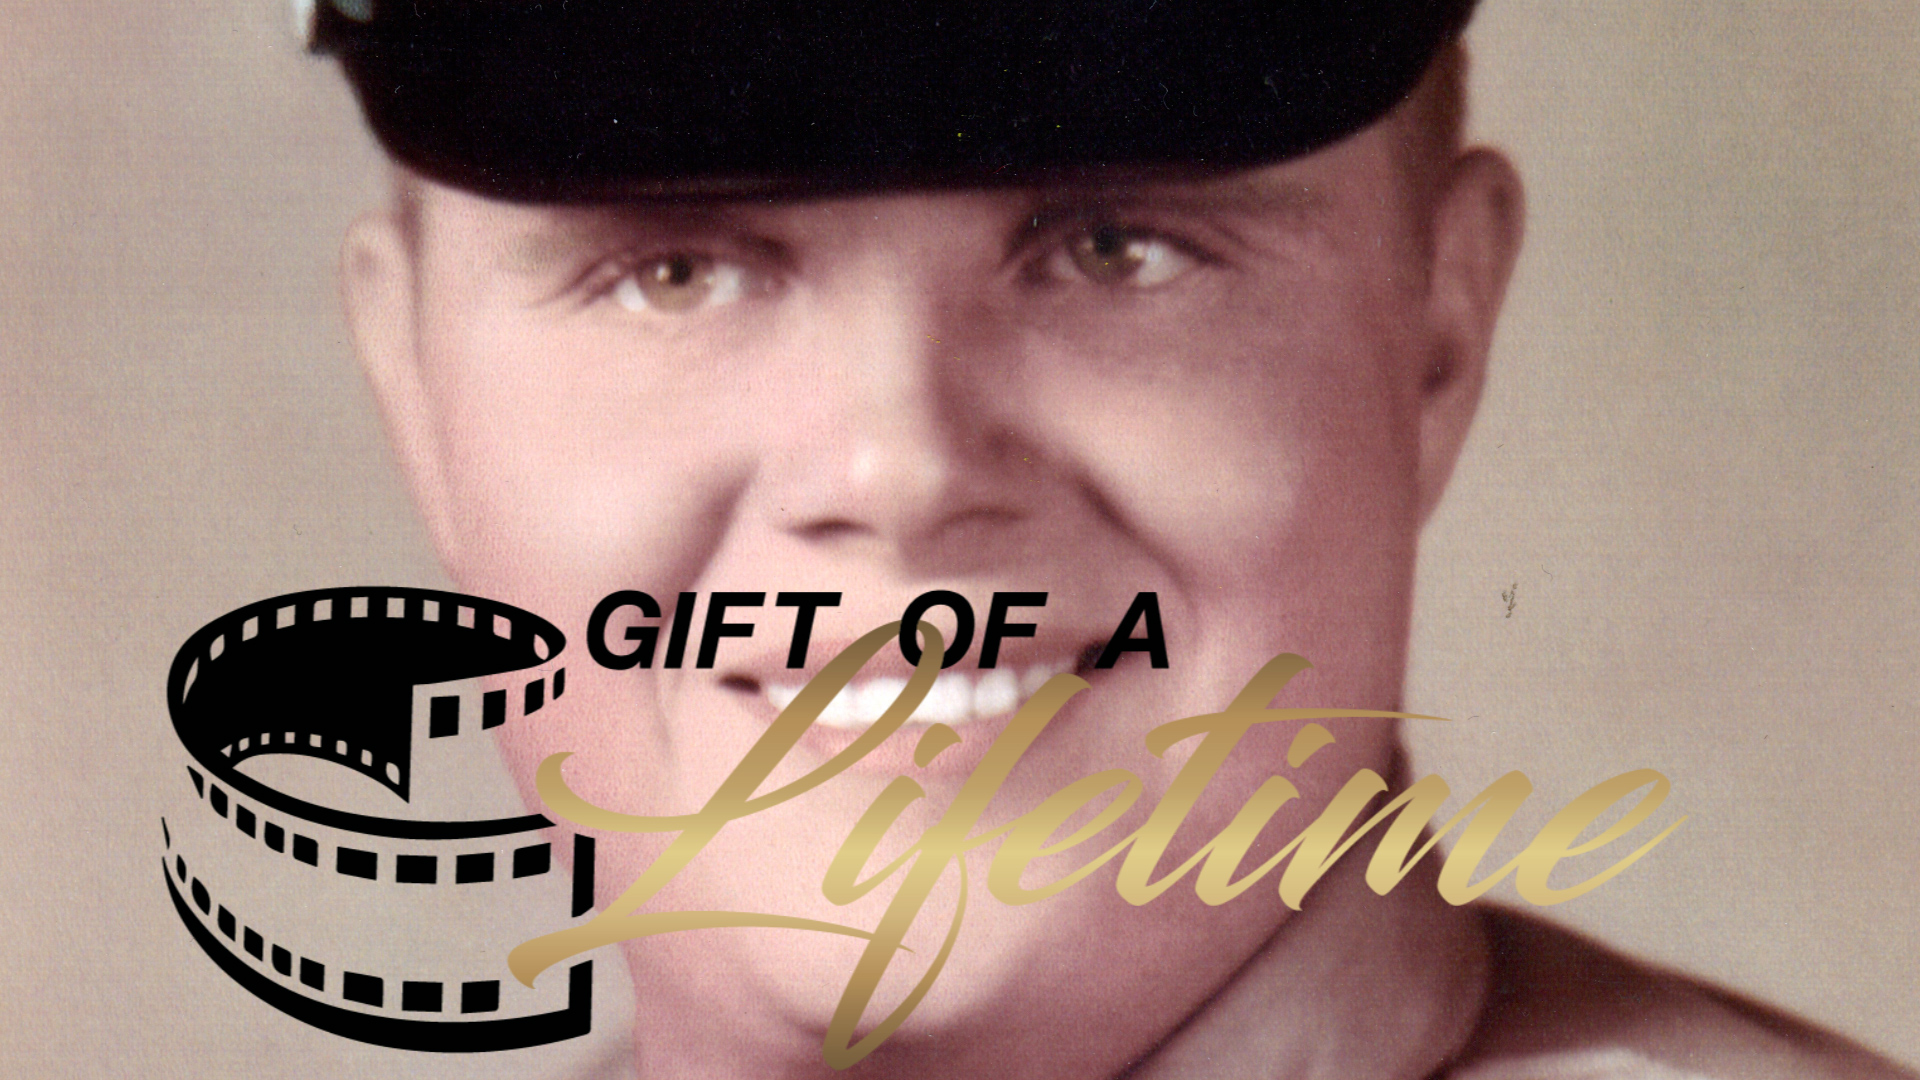 GIFT OF A LIFETIME SHORTS - TOM JENNINGS - CUBAN MISSILE CRISIS AND KENNEDY ASSASSINATION